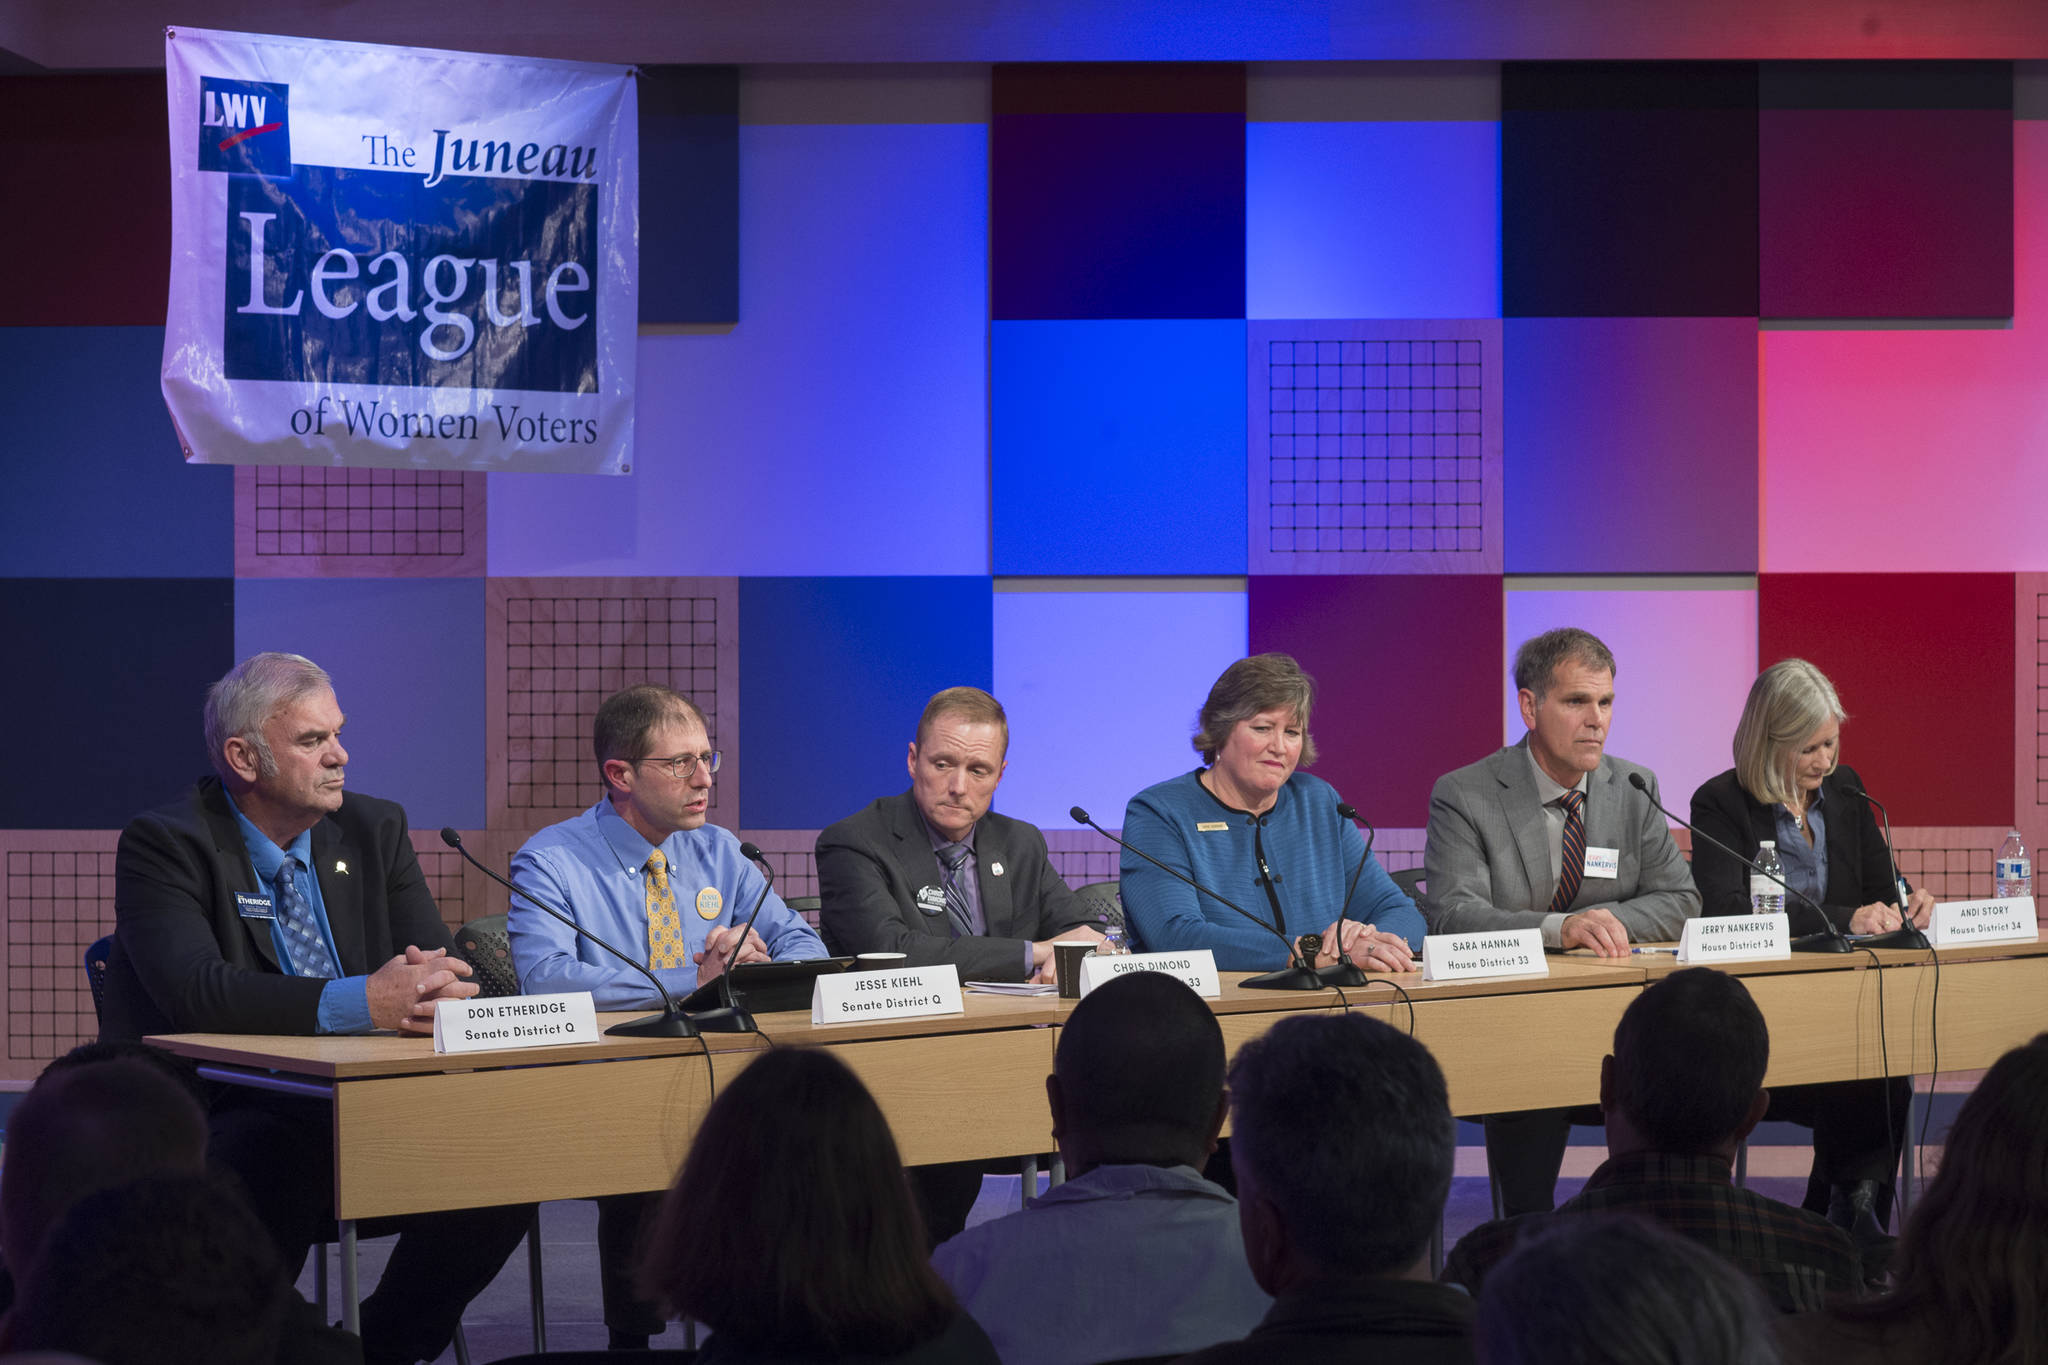 Legislative candidates answer questions during a forum sponsored by the Juneau Empire, along with the League of Women Voters of Juneau, Juneau Votes! and KTOO at KTOO on Tuesday, Oct. 9, 2018. From left: Senate District Q candidates Don Etheridge and Jesse Kiehl, House District 33 candidates Chris Dimond and Sara Hannan and House District 34 candidates Jerry Nankervis and Andi Story. (Michael Penn | Juneau Empire)